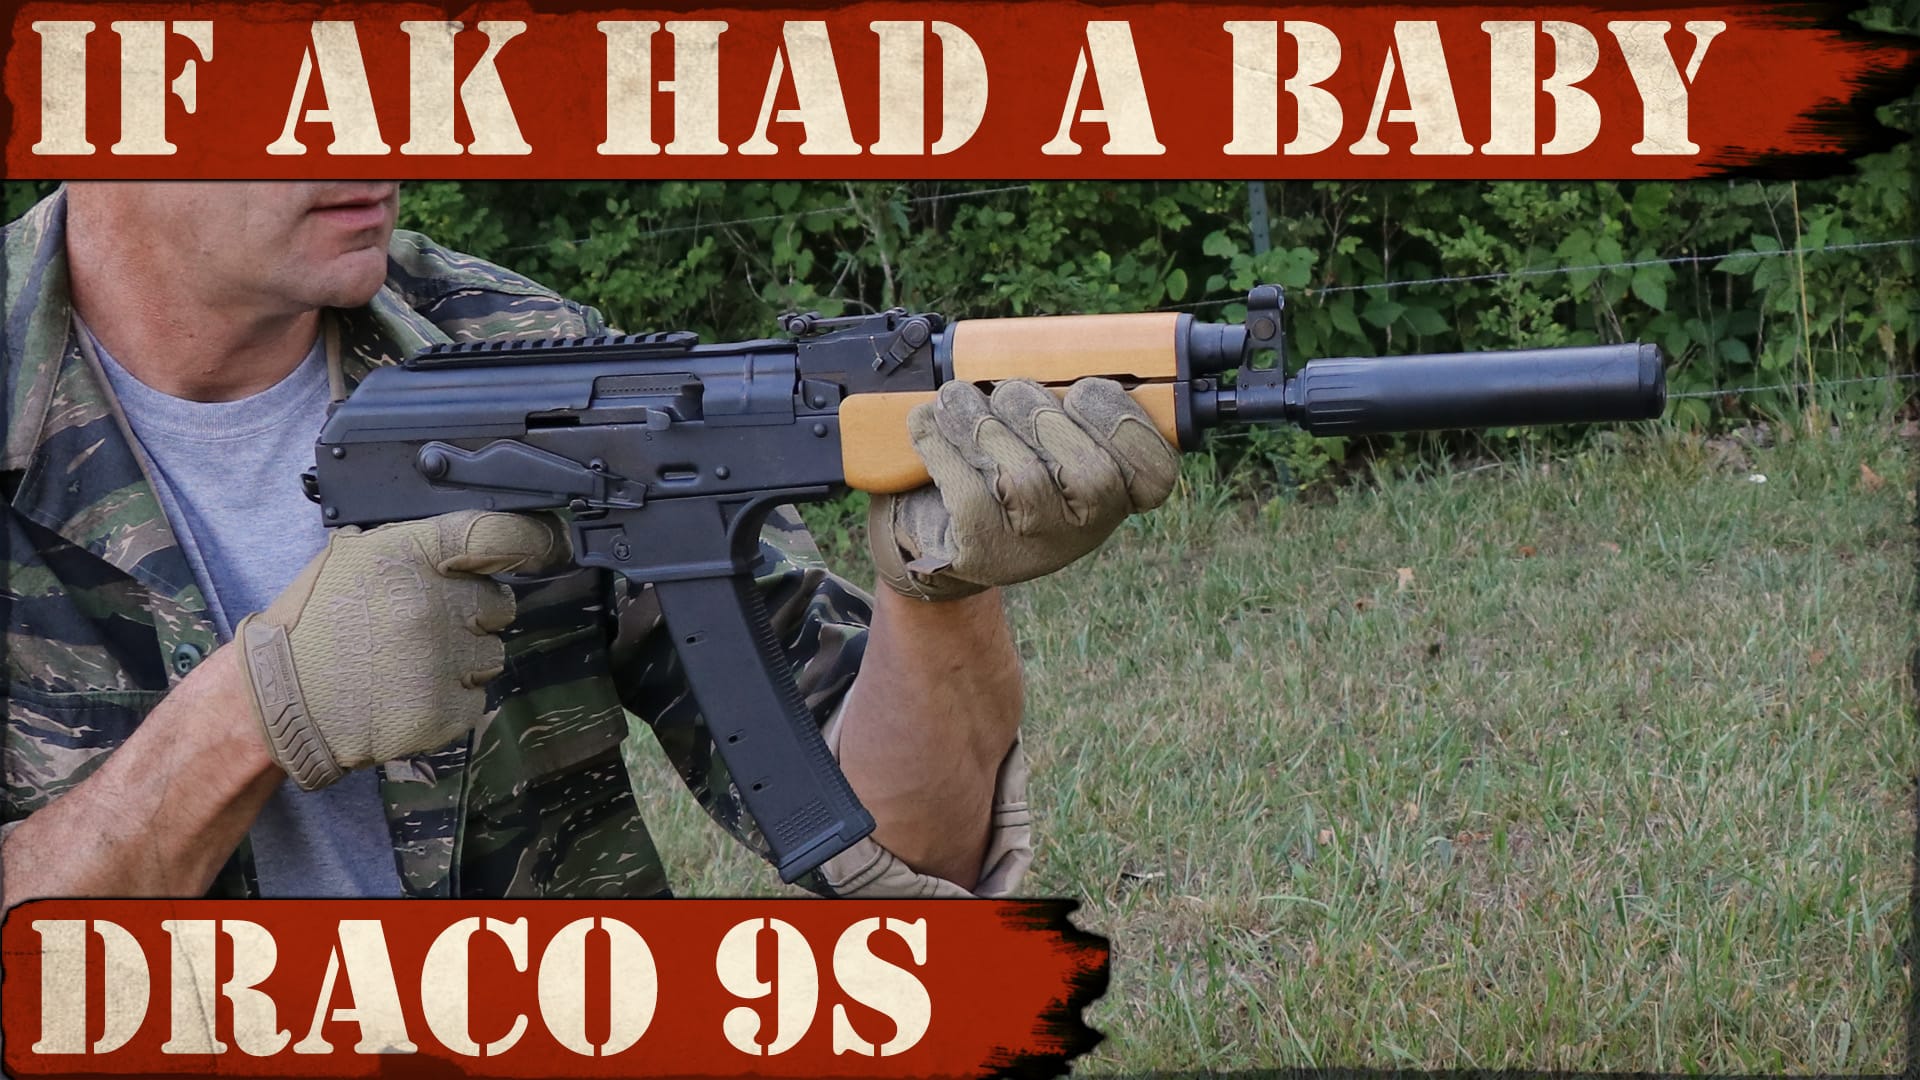 If AK had a baby: Draco 9S